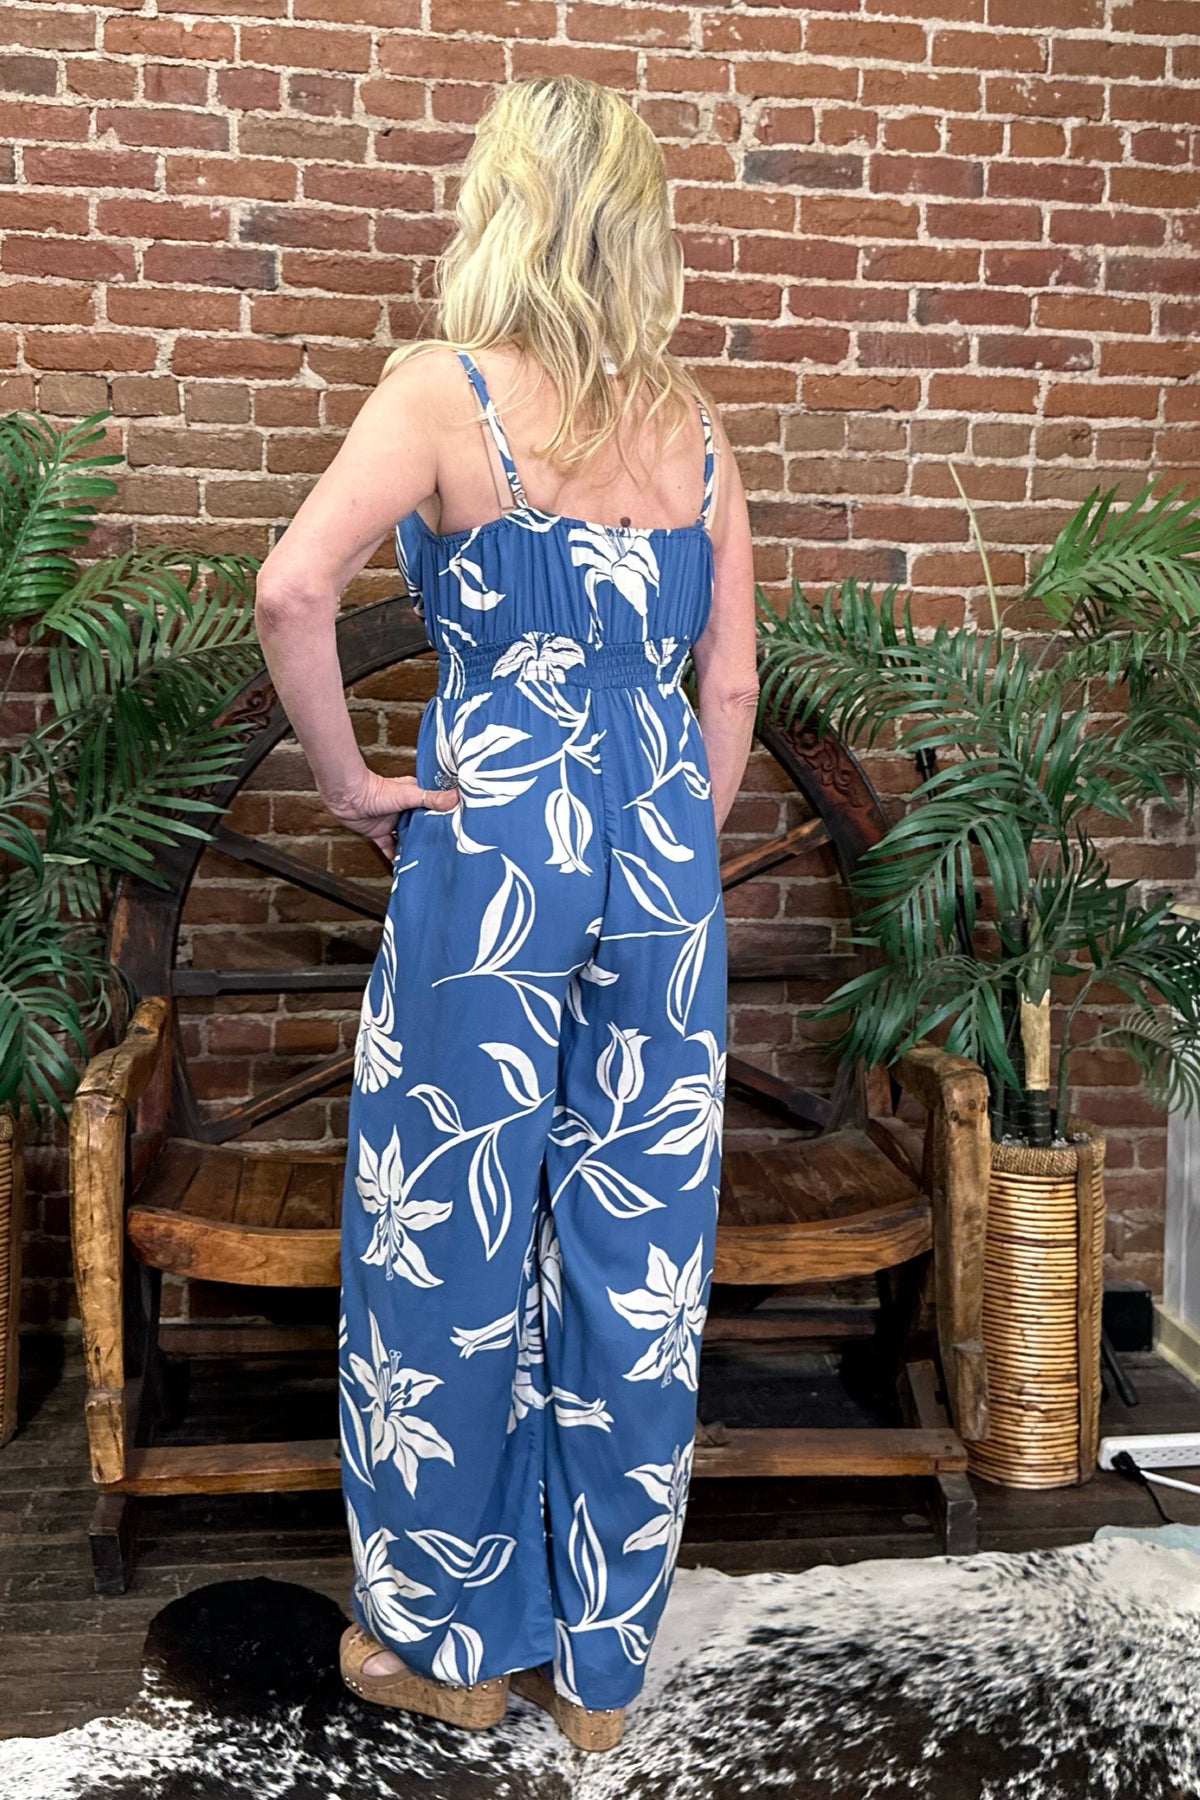 Blue V-Neck Jumpsuit with Slit Leg By Angie-Dress-Angie-Gallop 'n Glitz- Women's Western Wear Boutique, Located in Grants Pass, Oregon